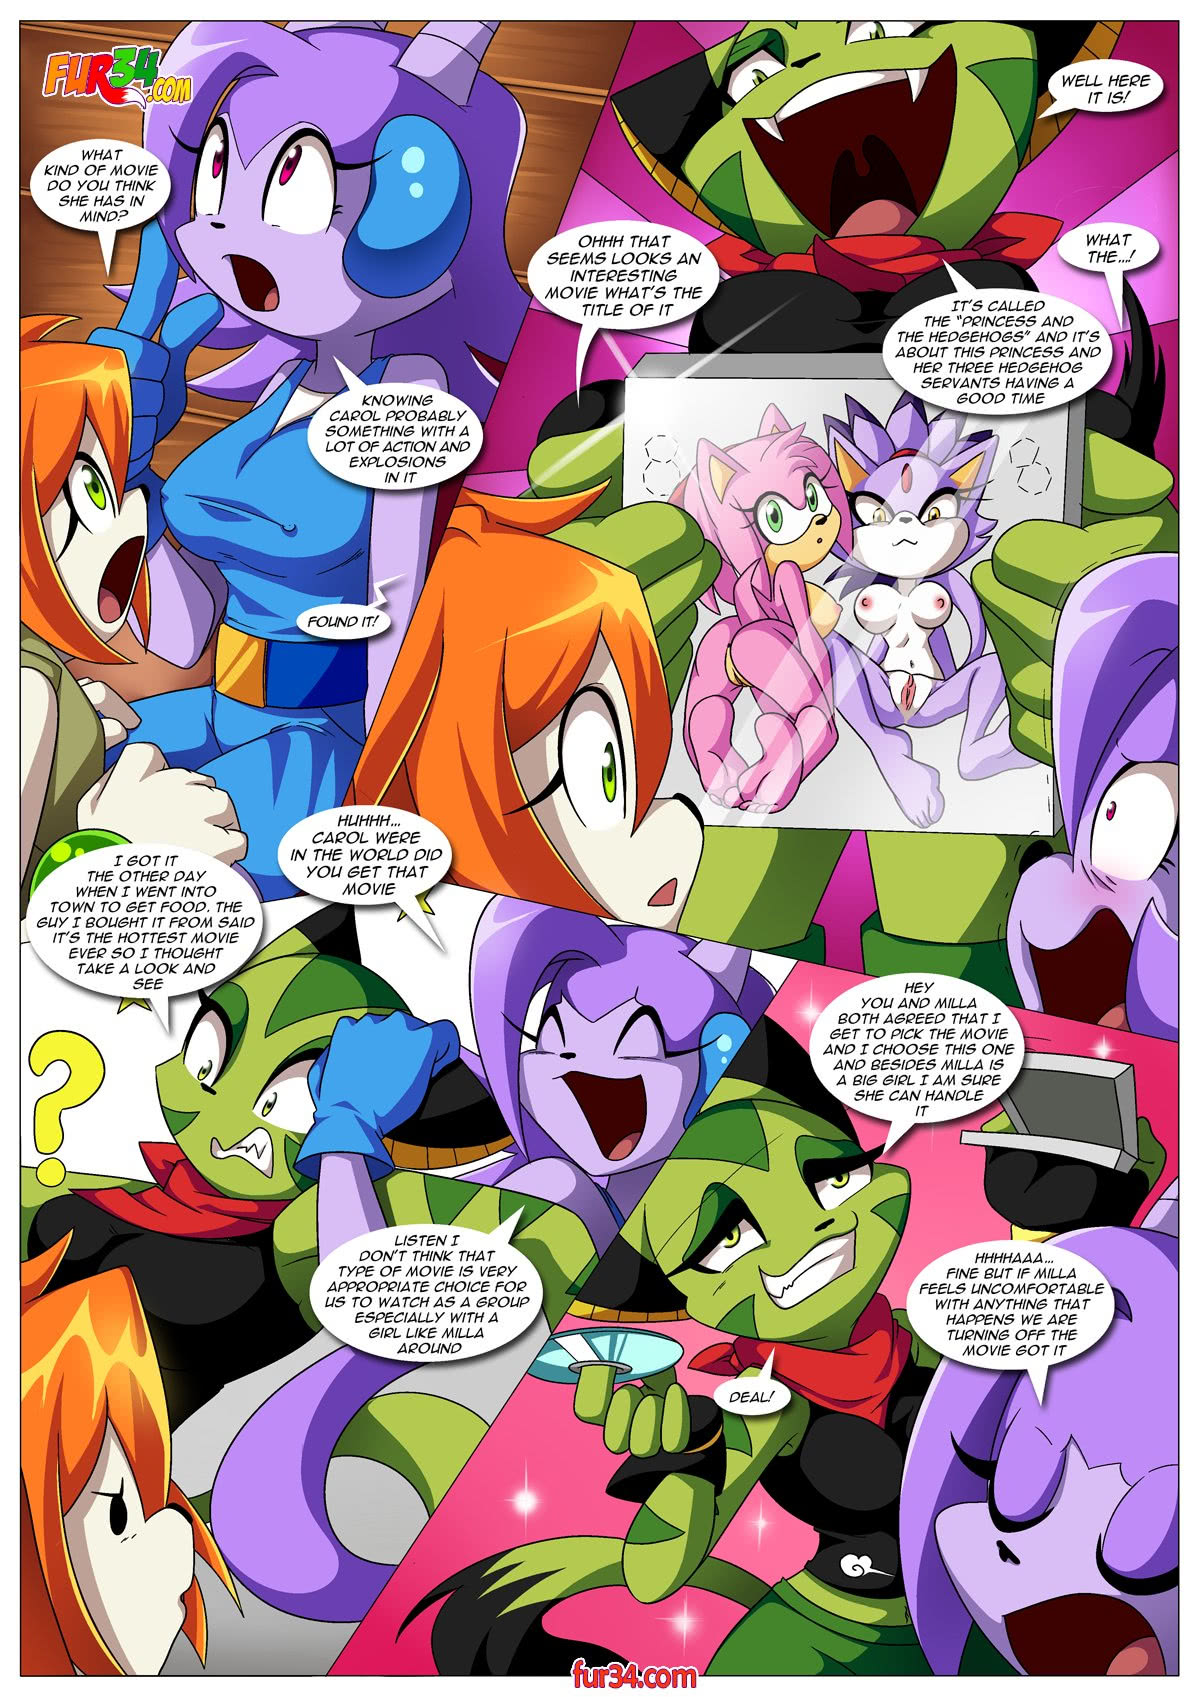 Watching A Movie With Friends - Page 3